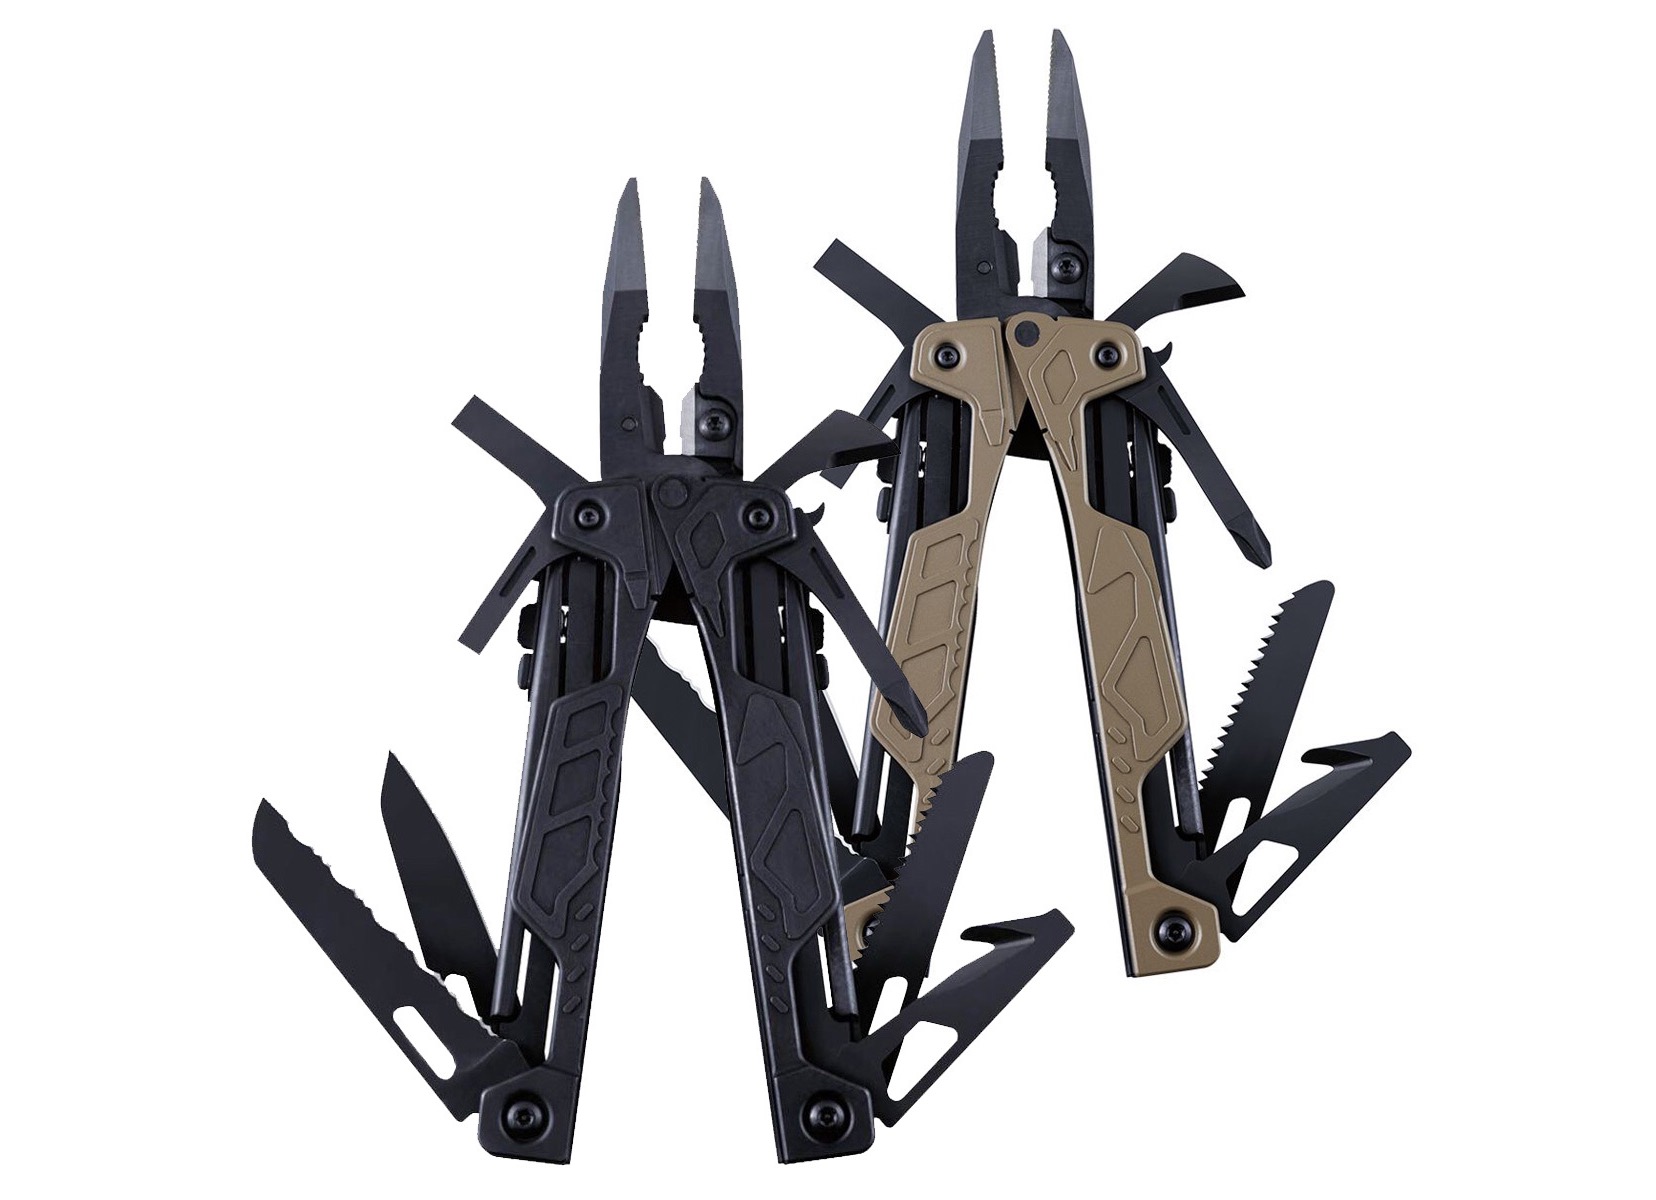 Leatherman OHT one-handed multi-tool. ($80 for black, $90 for coyote tan)